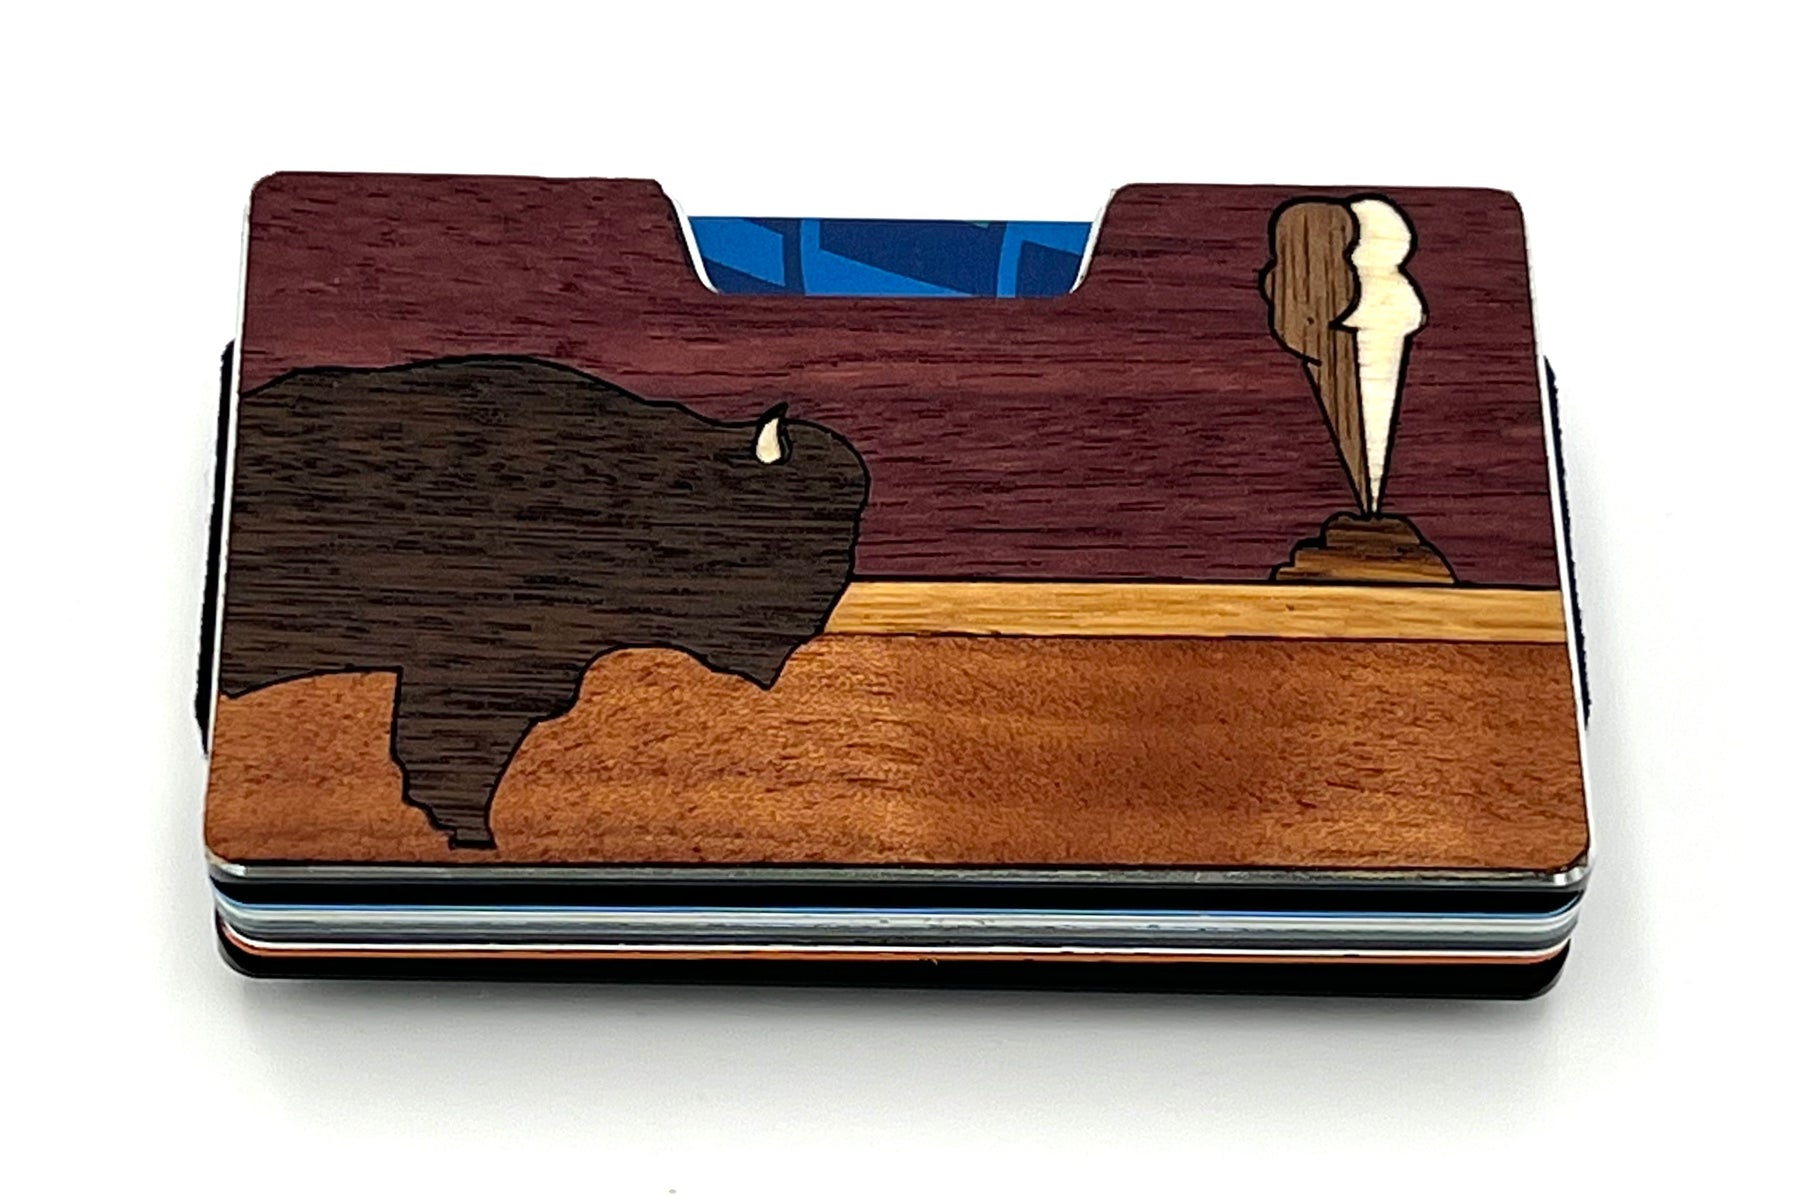 Old Faithful Wood Inlay Wallets for Men